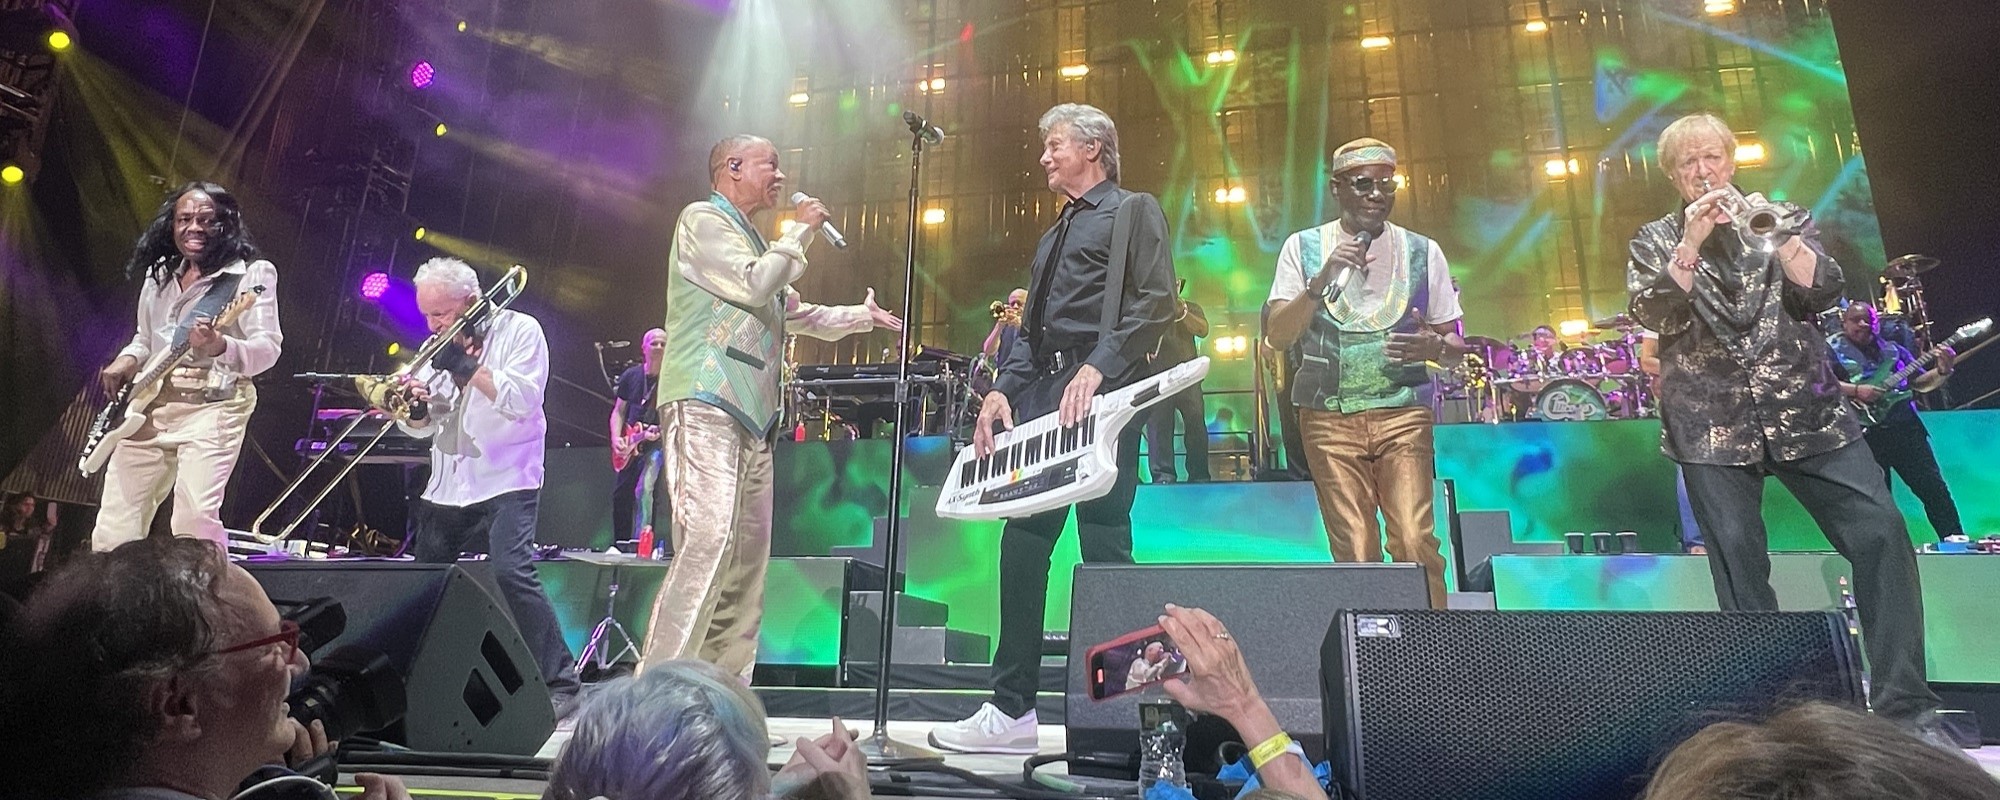 Review: Chicago and Earth, Wind & Fire Shine Separately and Together at Hit-Packed Concert in Bridgeport, Connecticut